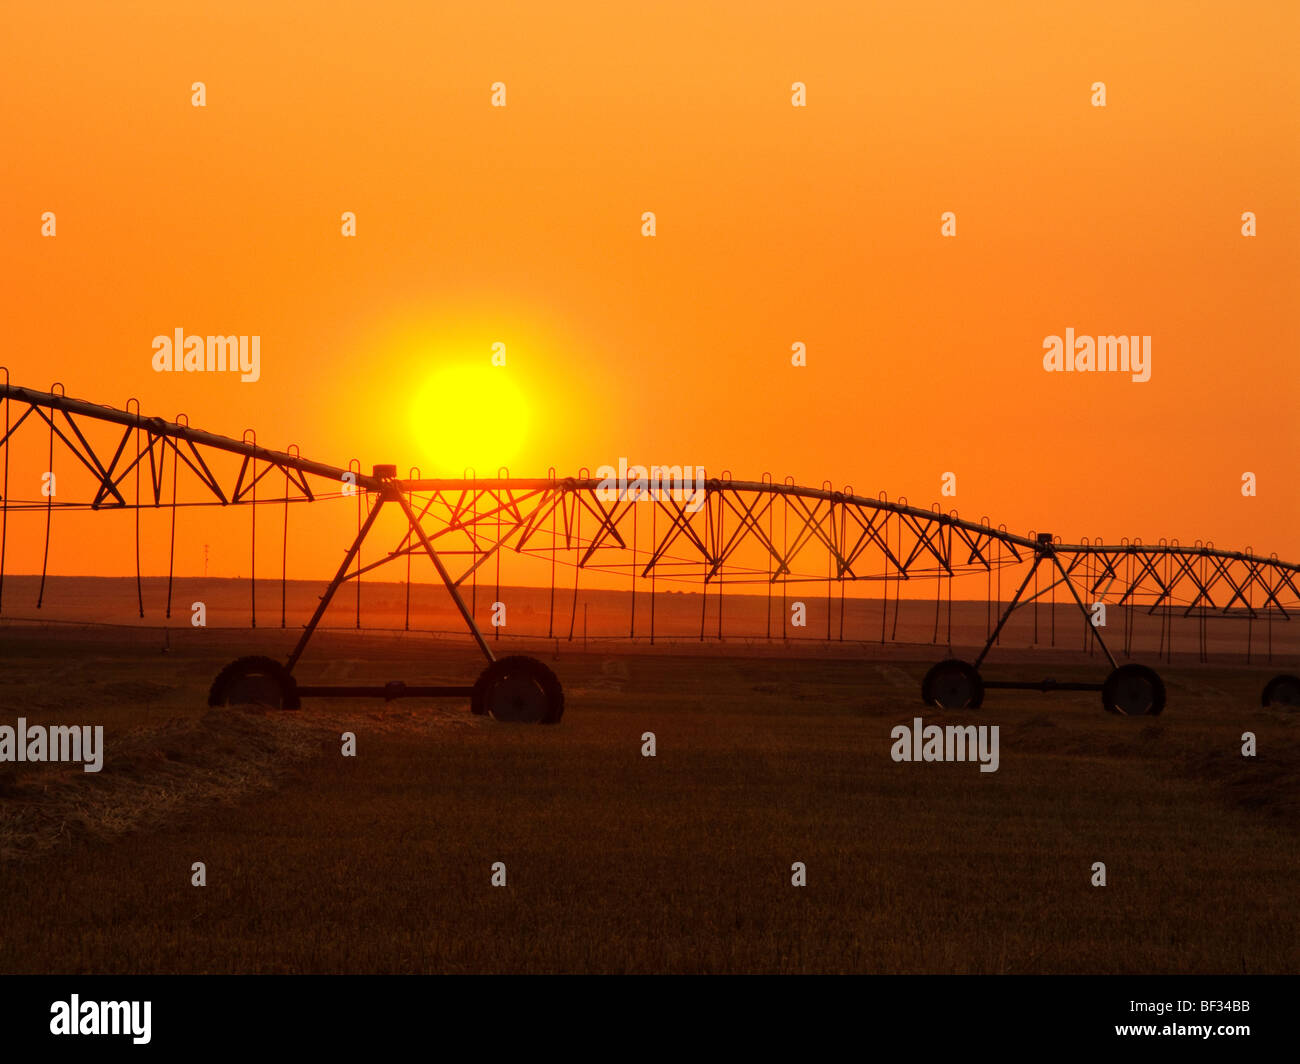 Agriculture - Center pivot irrigation system silhouetted at sunrise on a hay field / Alberta, Canada. Stock Photo